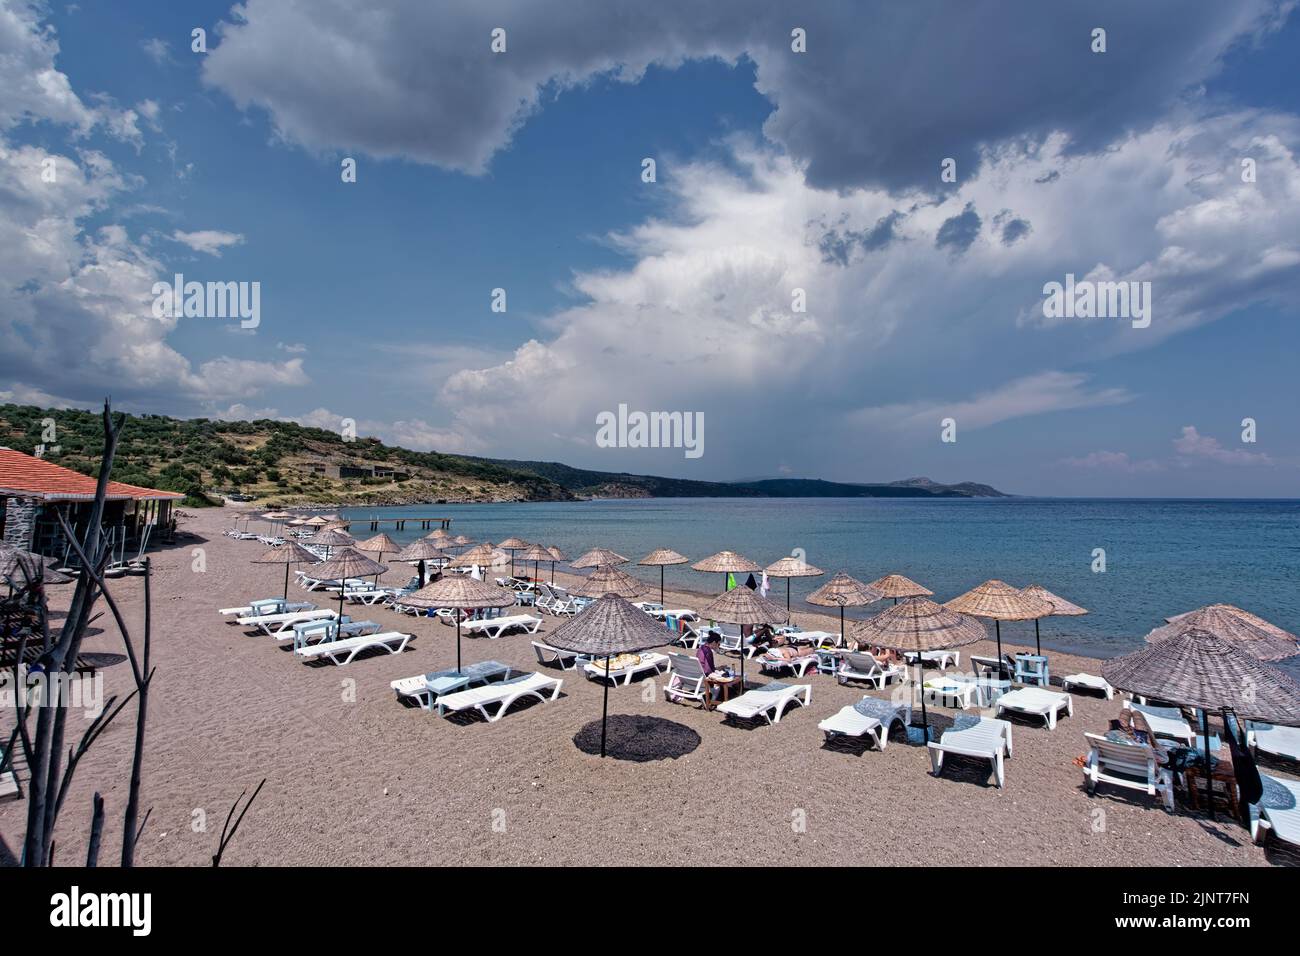 Parasols and lounge chairs on the beach with turquoise colored water of Assos on Aegean Sea. People tanning in summer day. Stock Photo